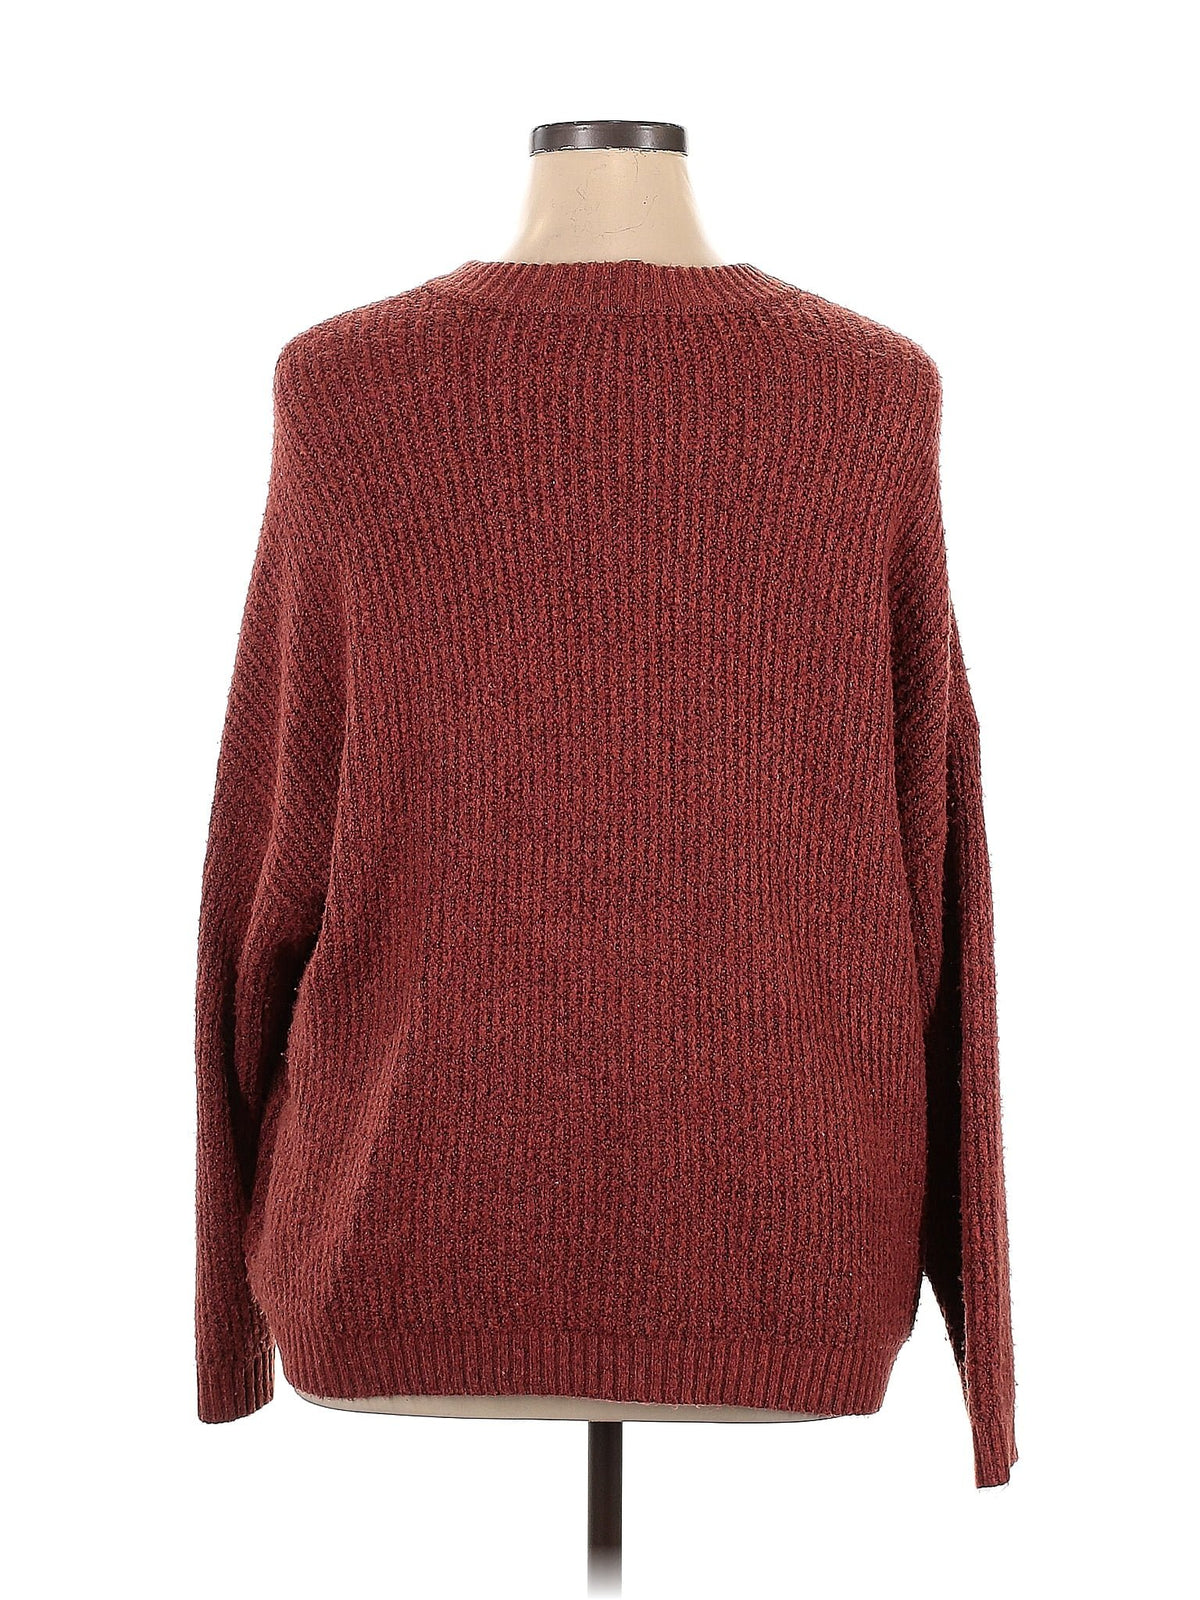 Pullover Sweater size - XL